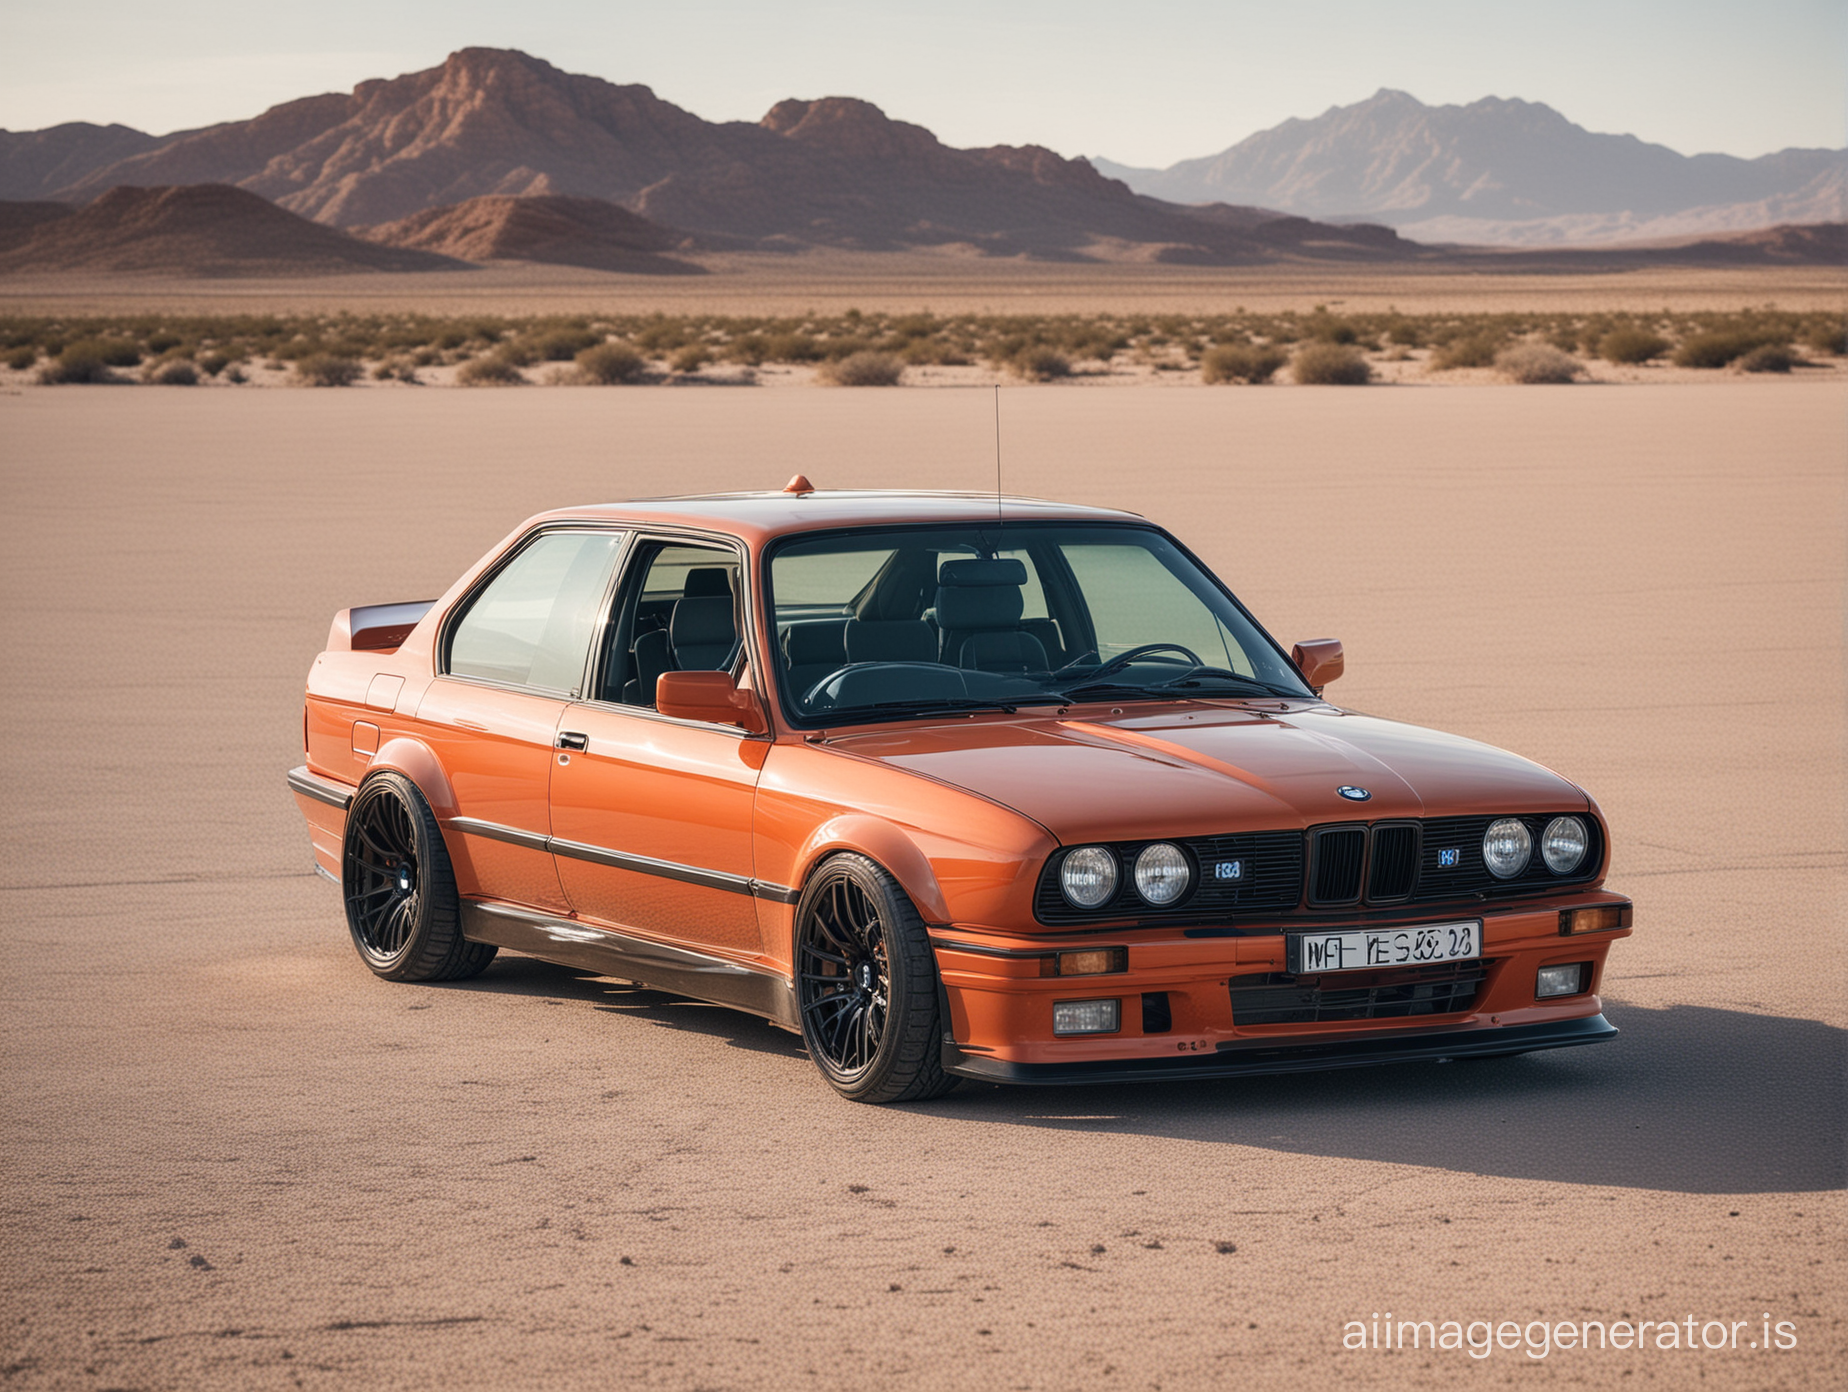 BMW e30 m3 completely made out of glass. In the desert